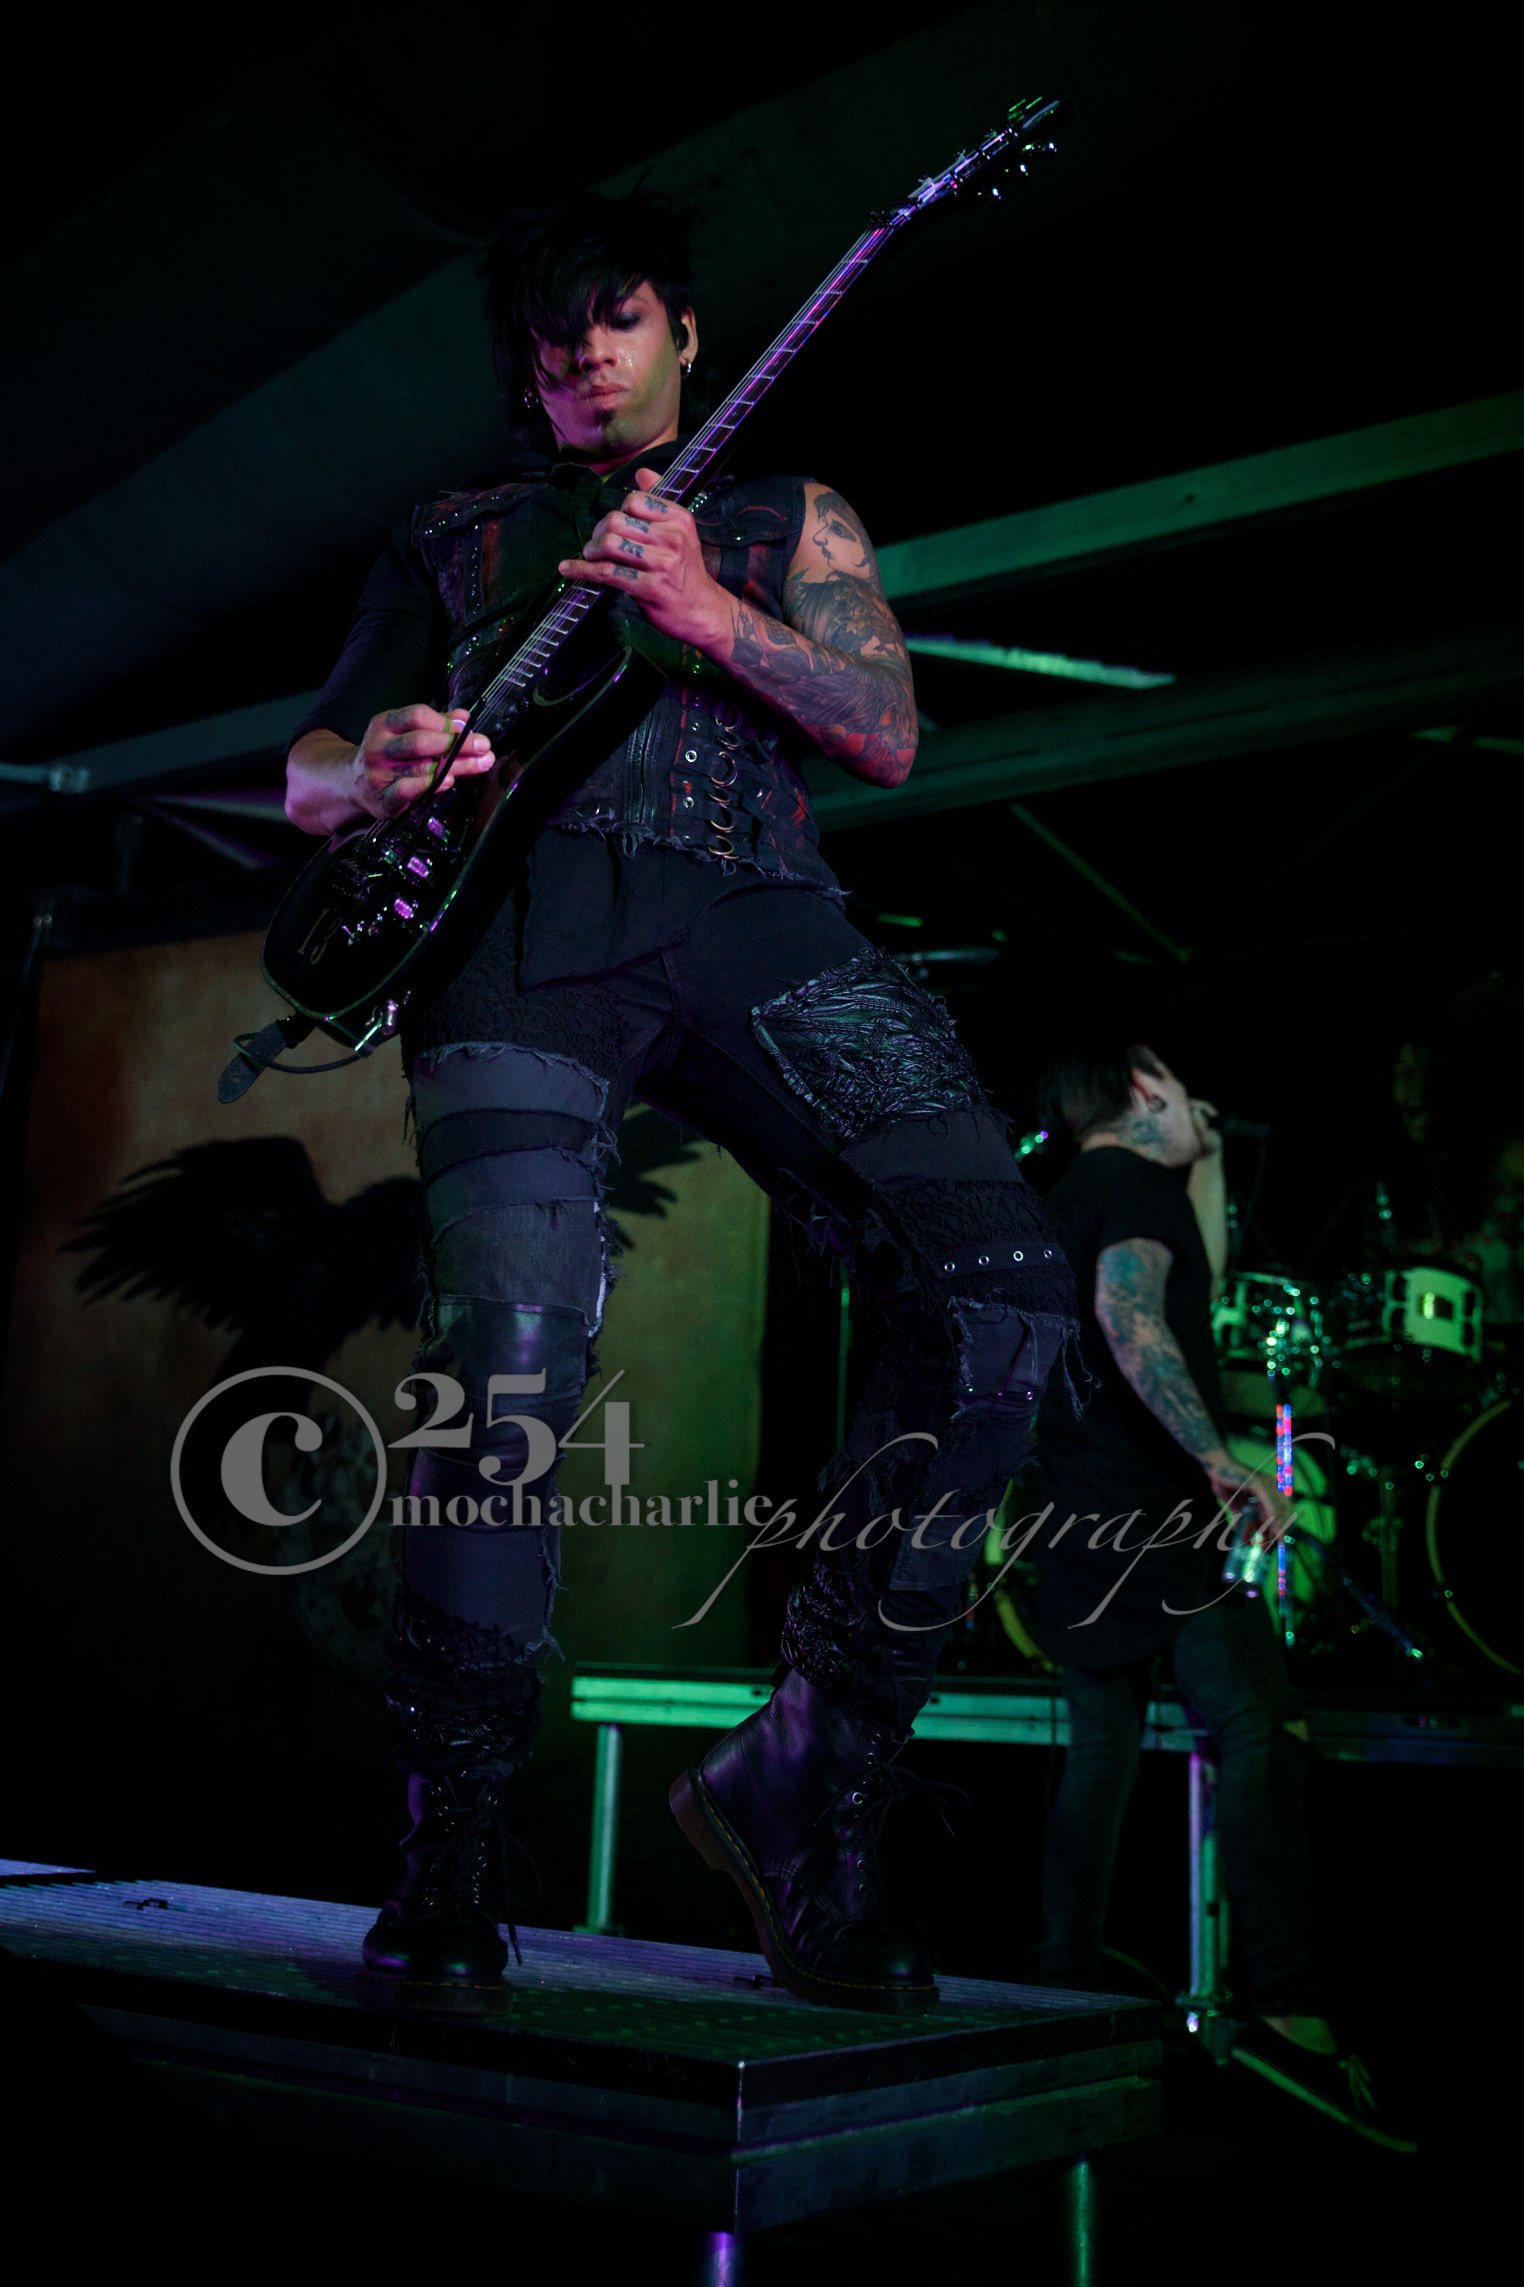 Escape The Fate at Uproar (Photo by Mocha Charlie)